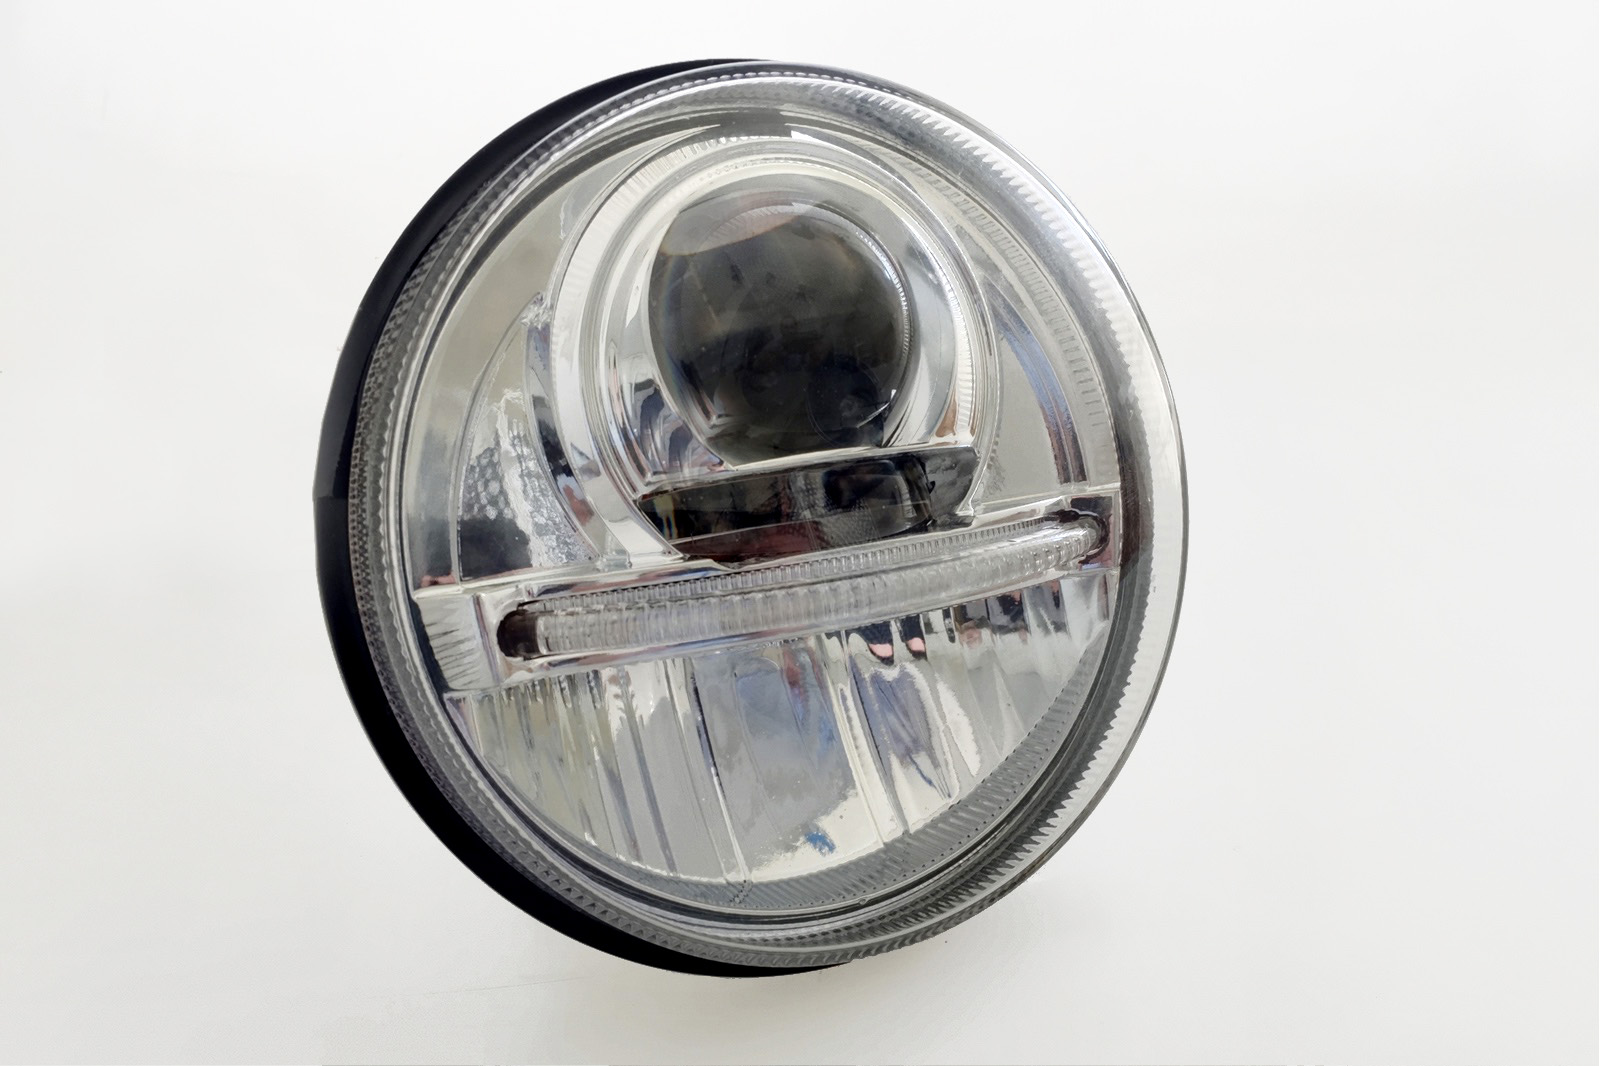 ▷ Nolden 5.75 LED headlight - available here!  Nakatanenga 4x4-Equipment  for Land Rover, Offroad & Outdoor